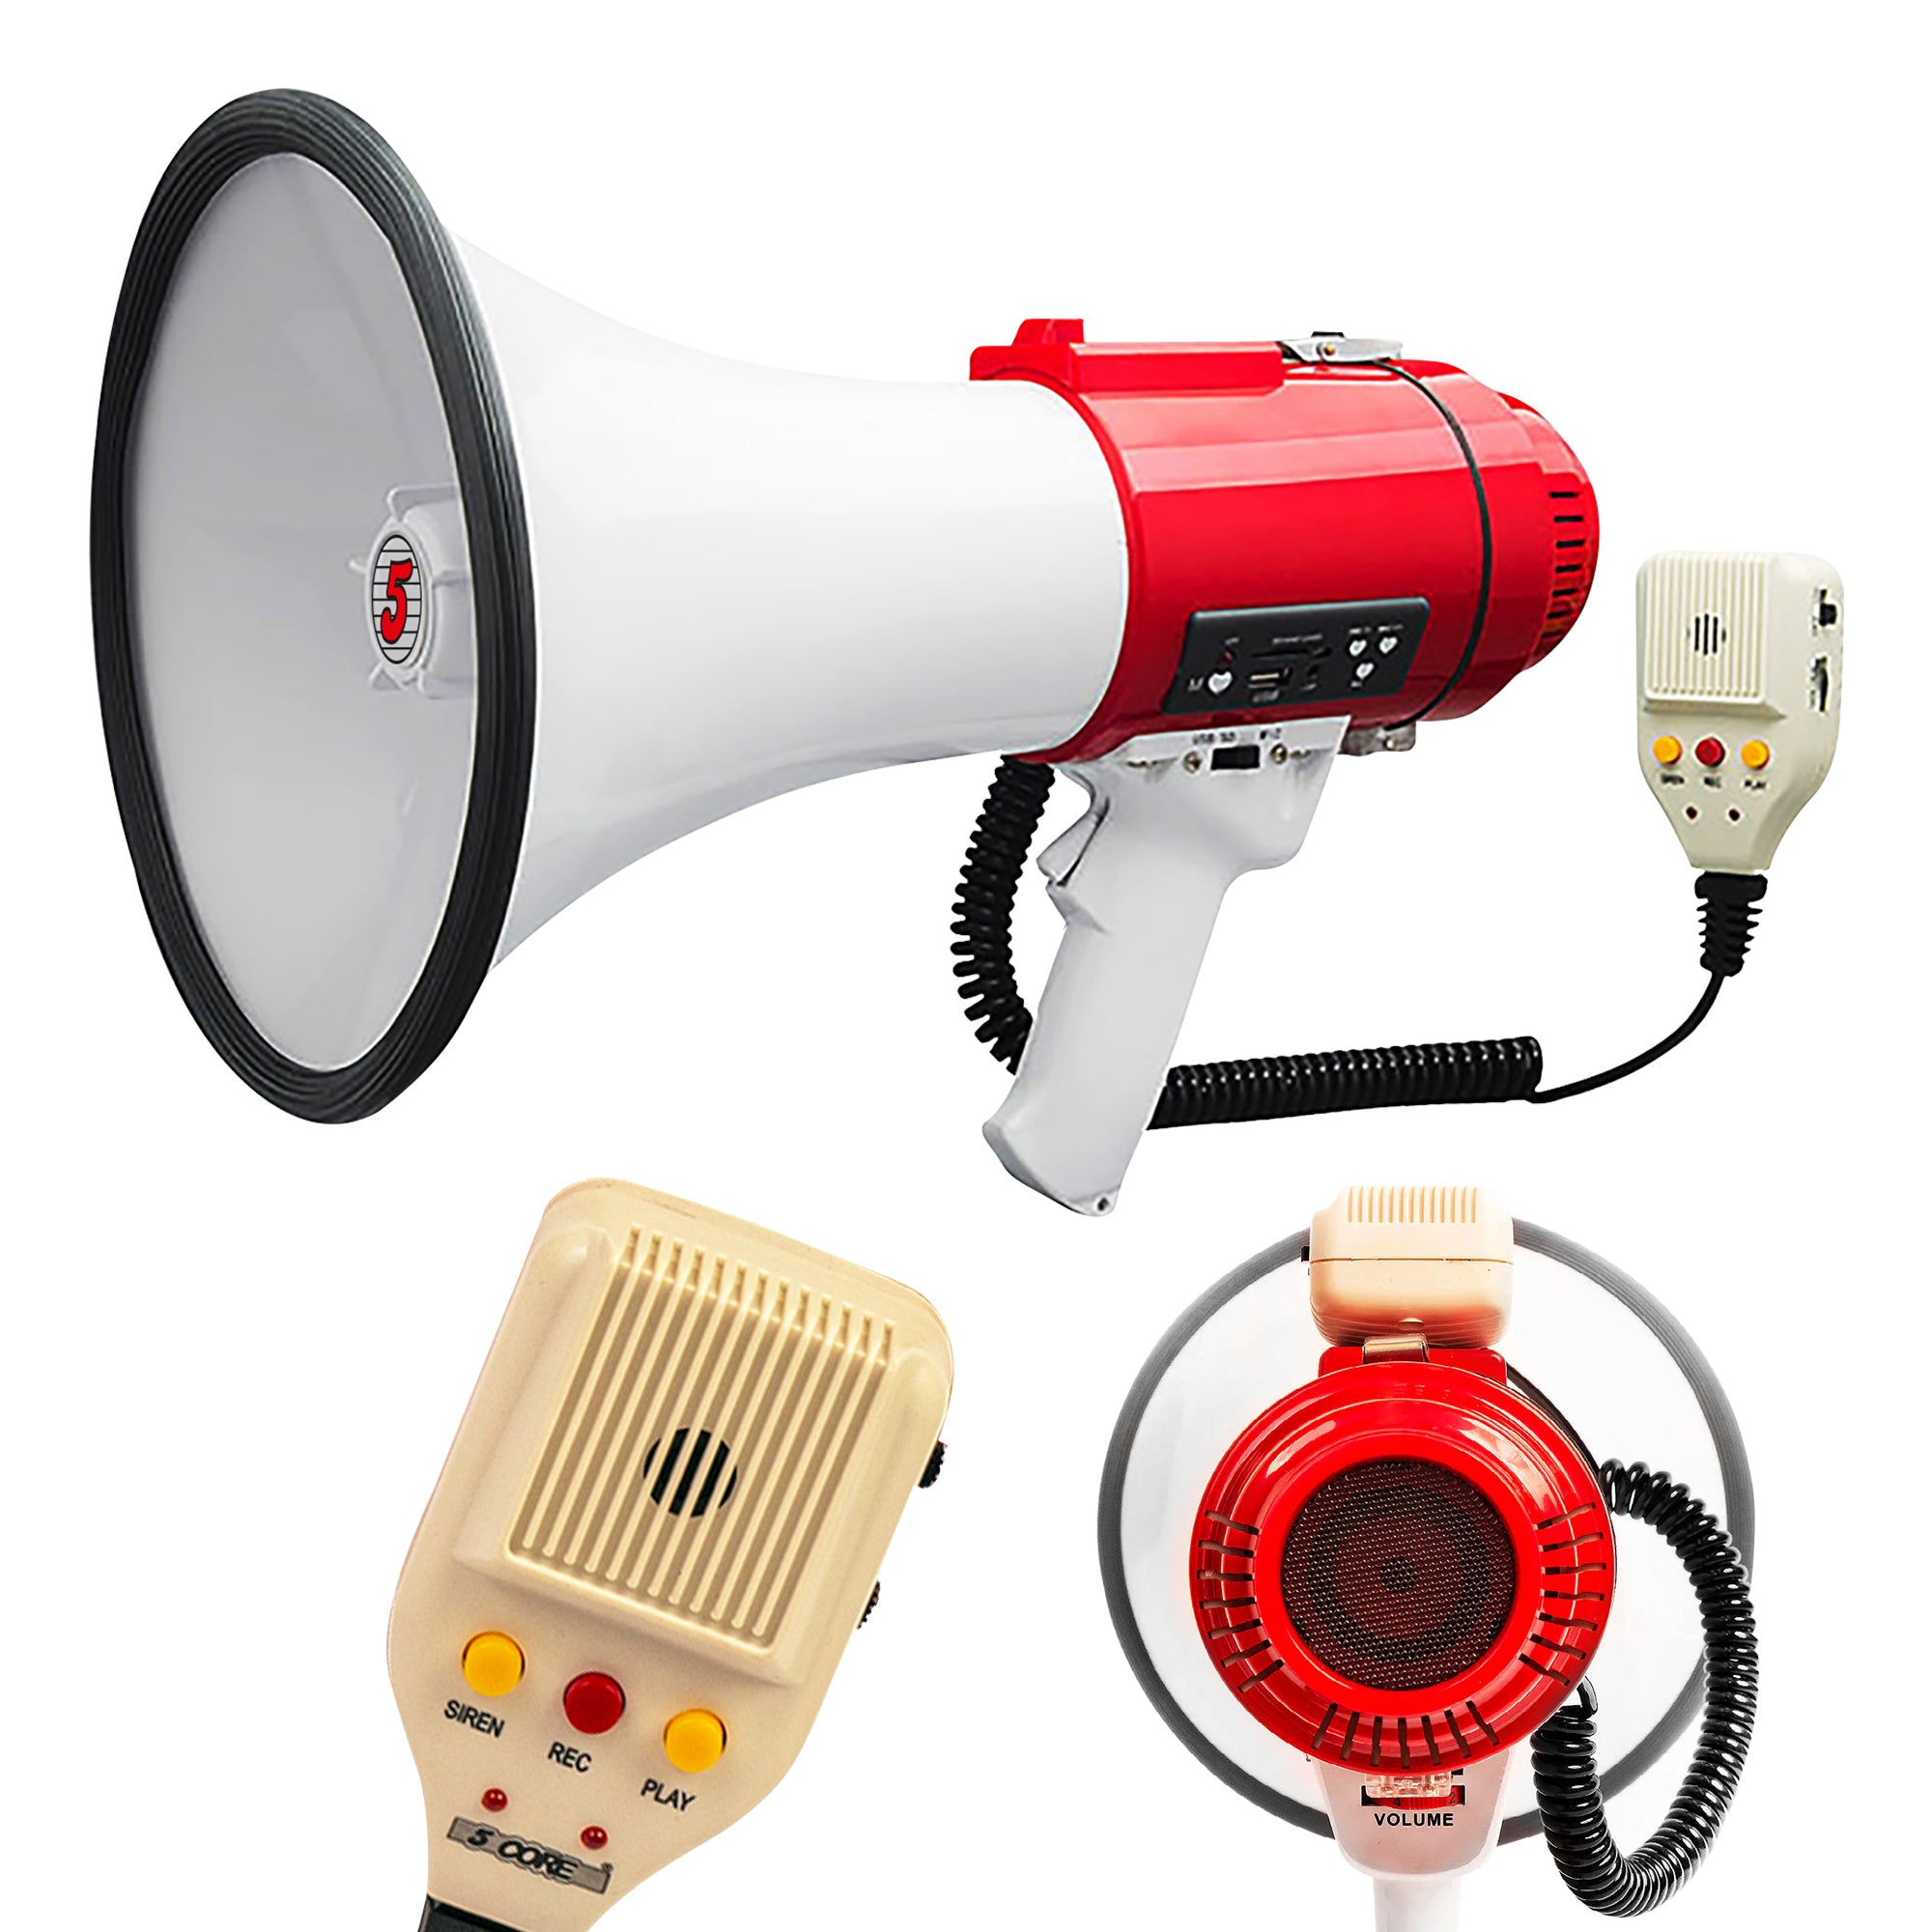 5 Core High Power Megaphone 60W Loud Siren Noise Maker Professional Bullhorn Speaker Rechargeable PA System w Recording USB SD Card Adjustable Volume for Sports Speeches Events Emergencies - 77SF